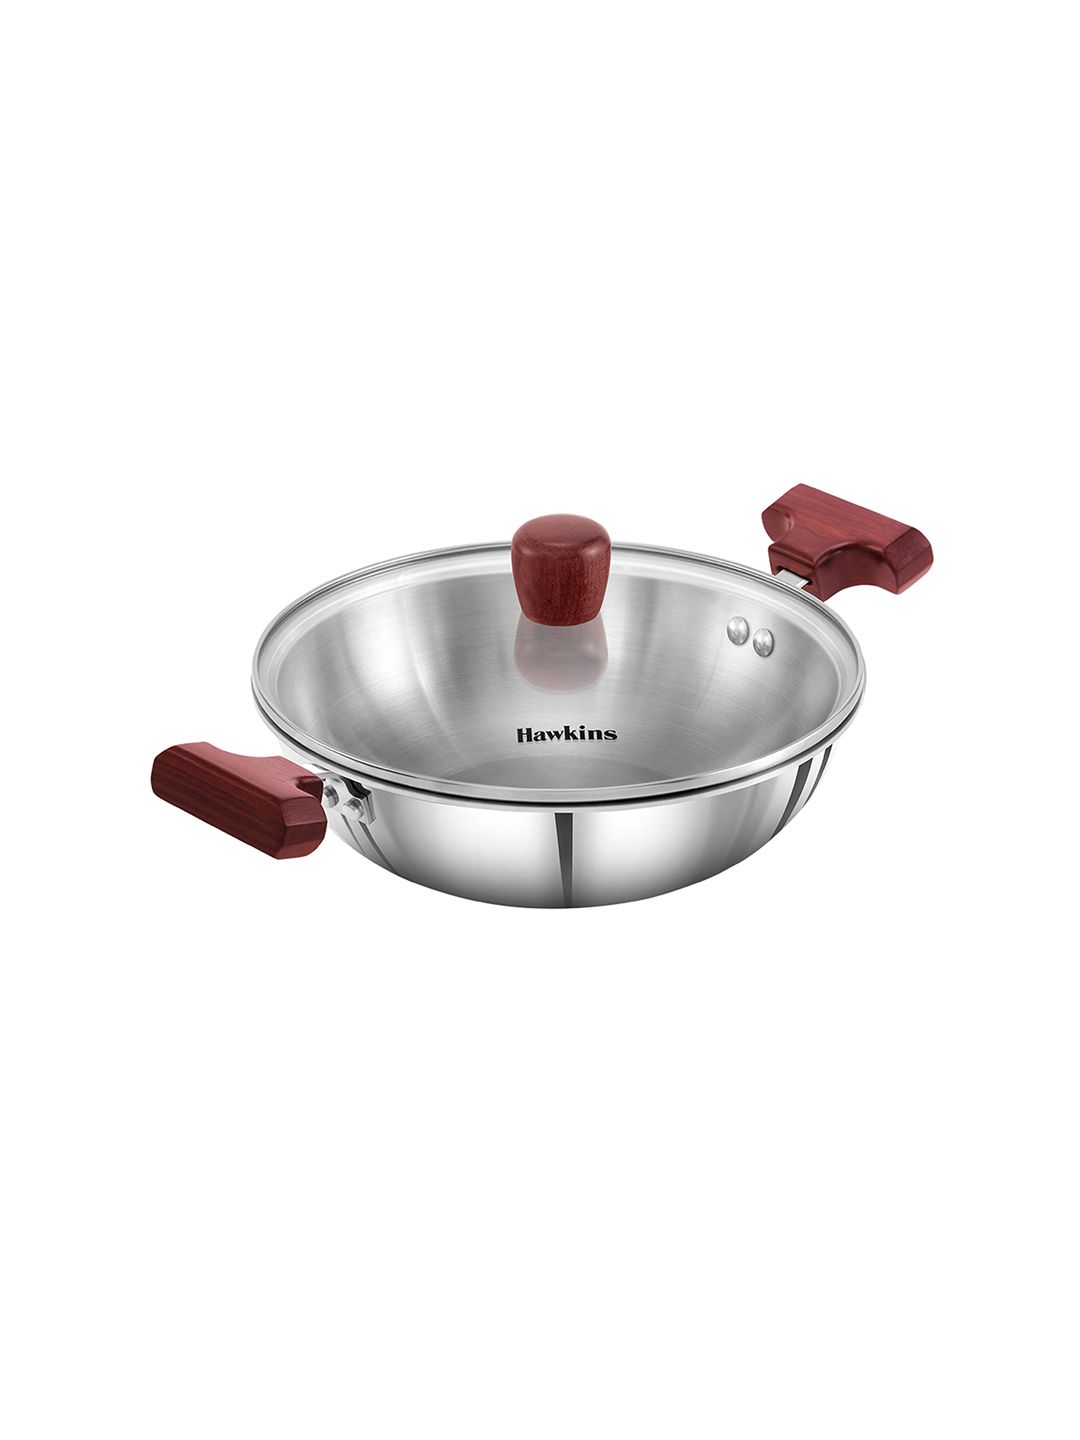 Hawkins Silver-Toned & Red Triply 3 mm Extra-Thick Stainless Steel Deep Fry Pan With Lid Price in India